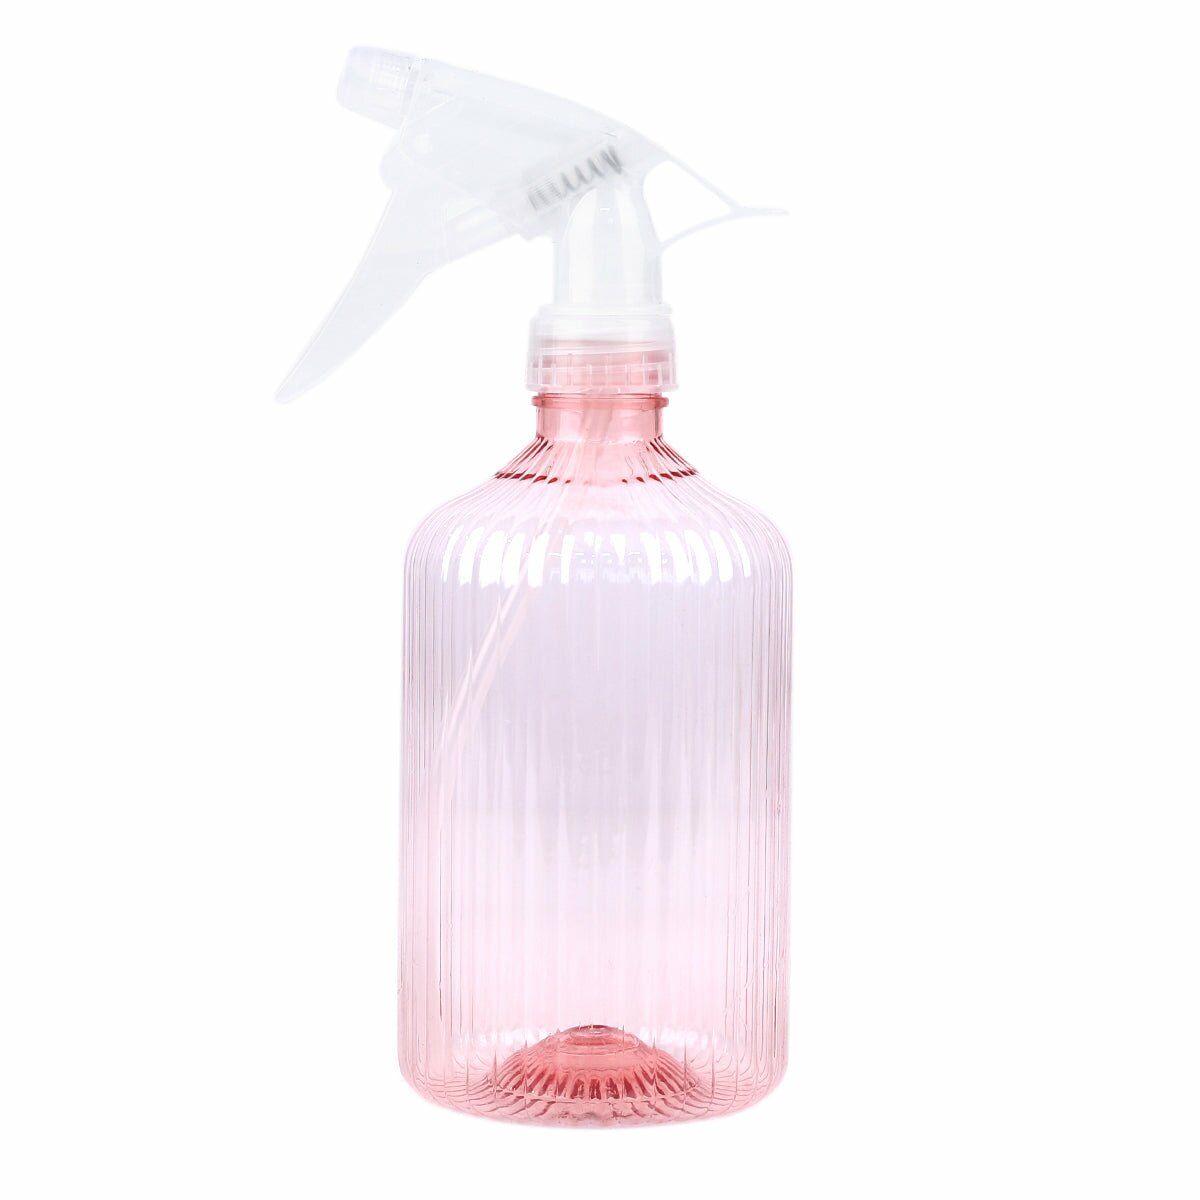 Plant mister for sale, spray bottle for sale, watering bottle for sale, plastic spray bottle, gardening tools for succulents and houseplants, handy plant spray bottle, mister bottle for air-plants, reusable mister